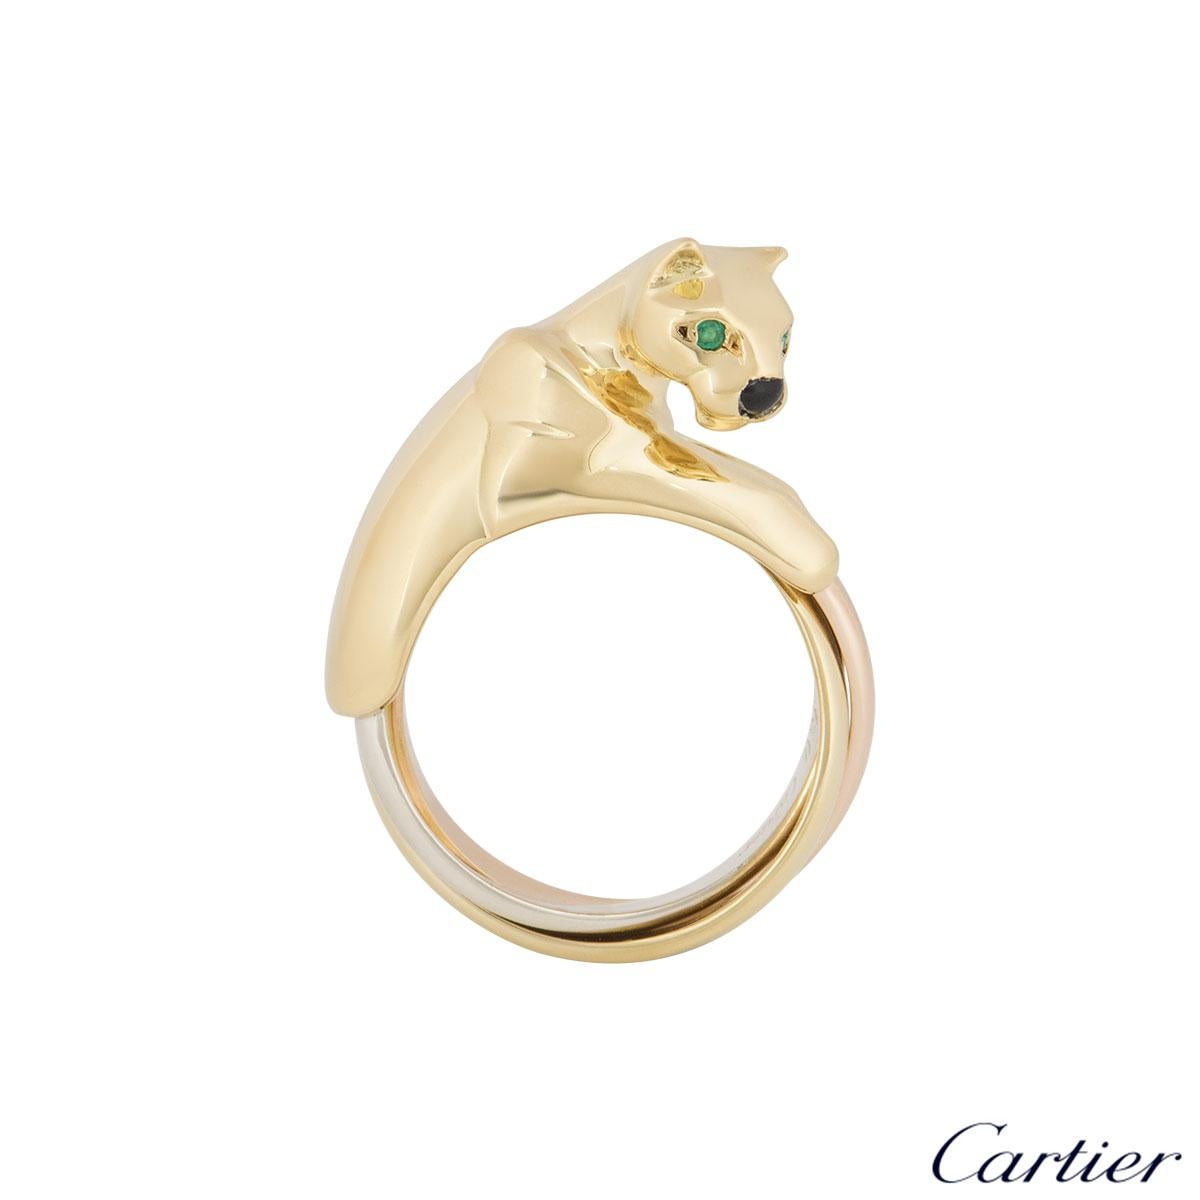 A beautiful 18k tri-colour gold panthere ring by Cartier from the Panthere collection. The ring is composed of a panthere head motif and is complemented with two round emeralds set as the eyes and onyx for the nose with the Trinity style body